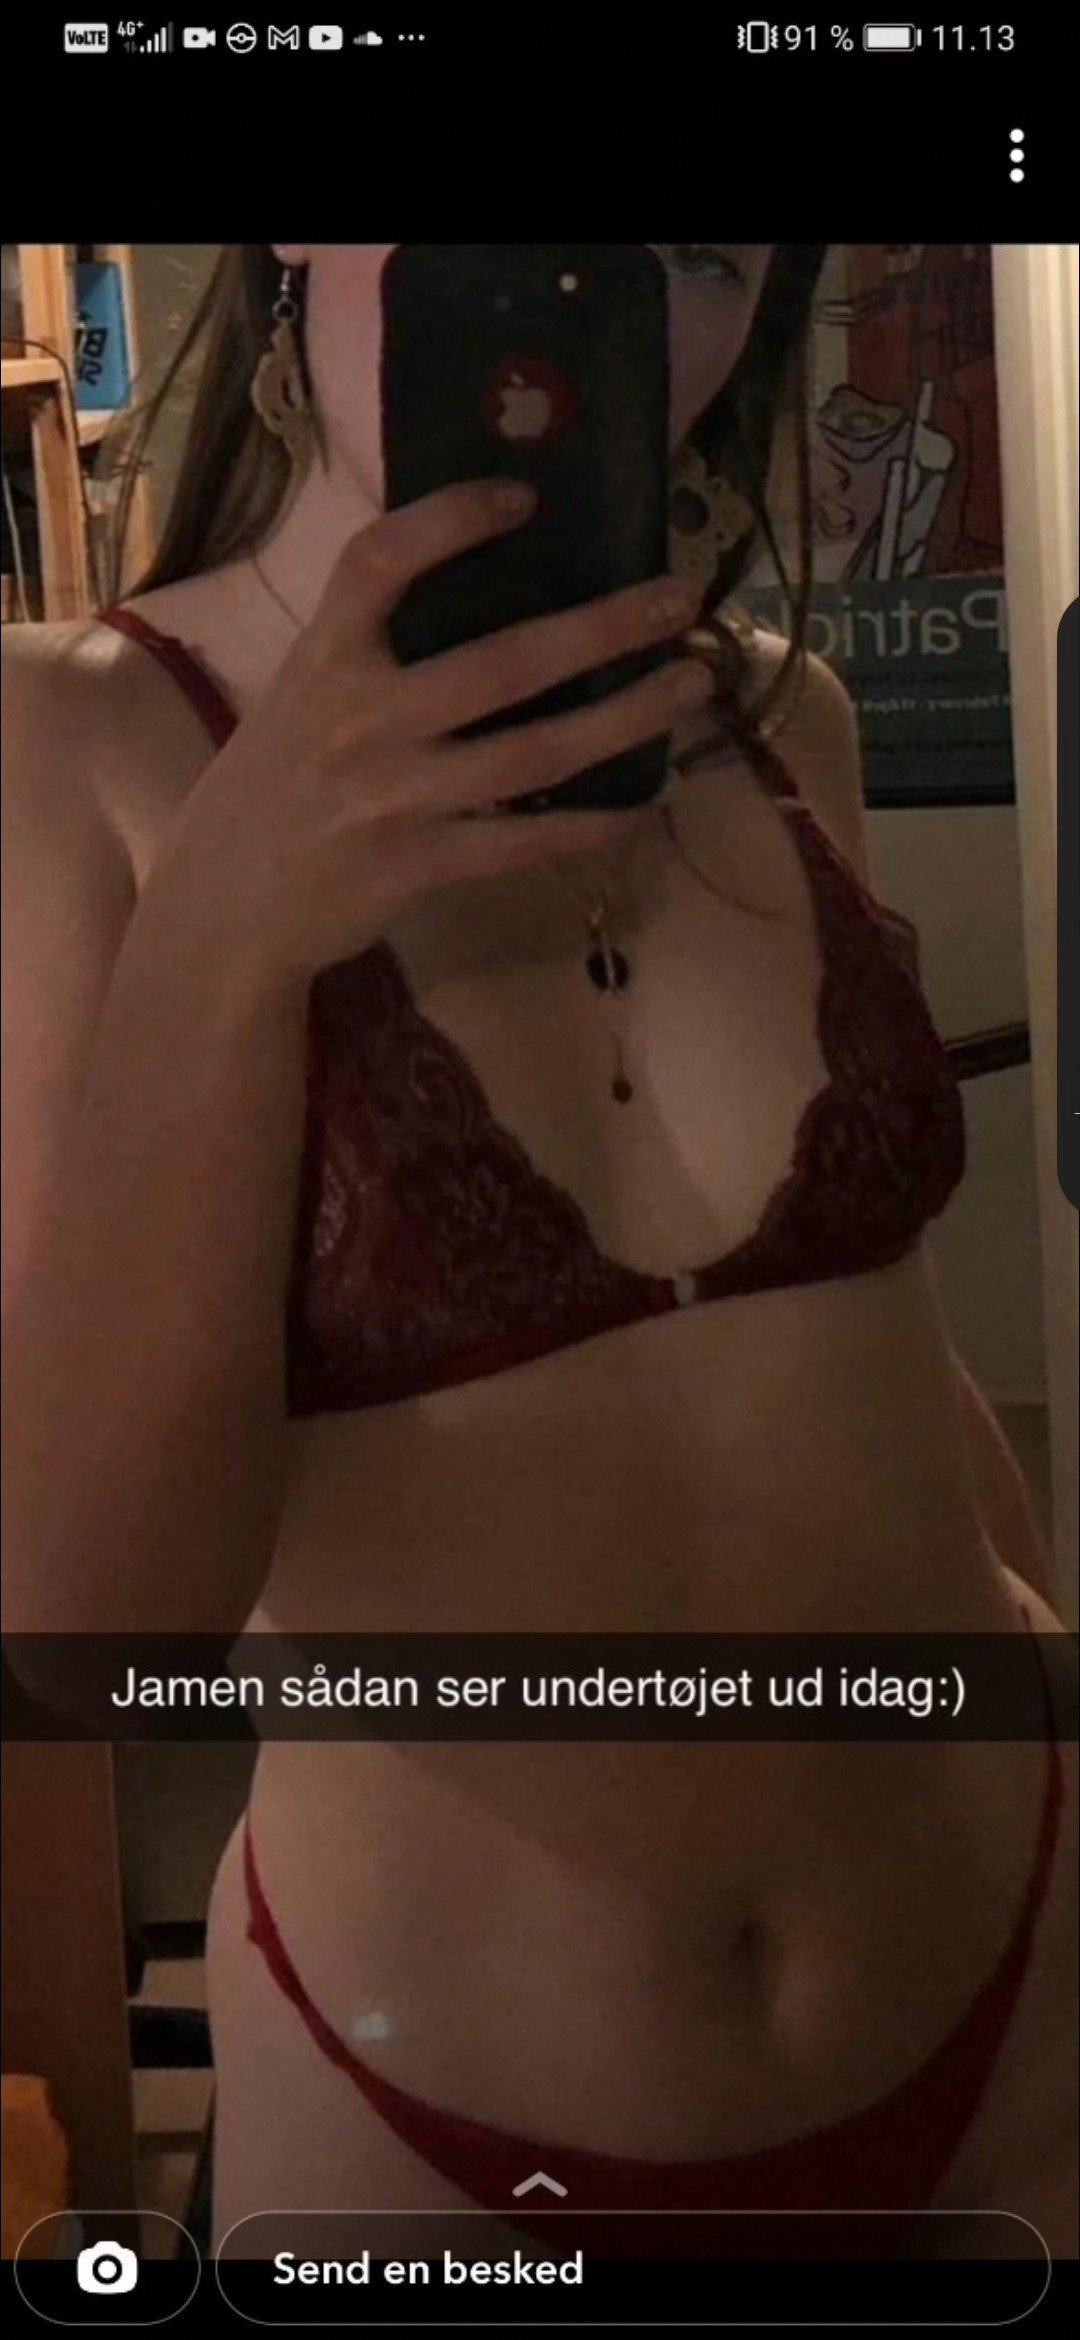 Photo by hvf91 with the username @hvf91,  February 21, 2022 at 9:39 PM. The post is about the topic Danish and the text says '#Danish #zenia #luder #snapchat #19y #ballerup #dansk'